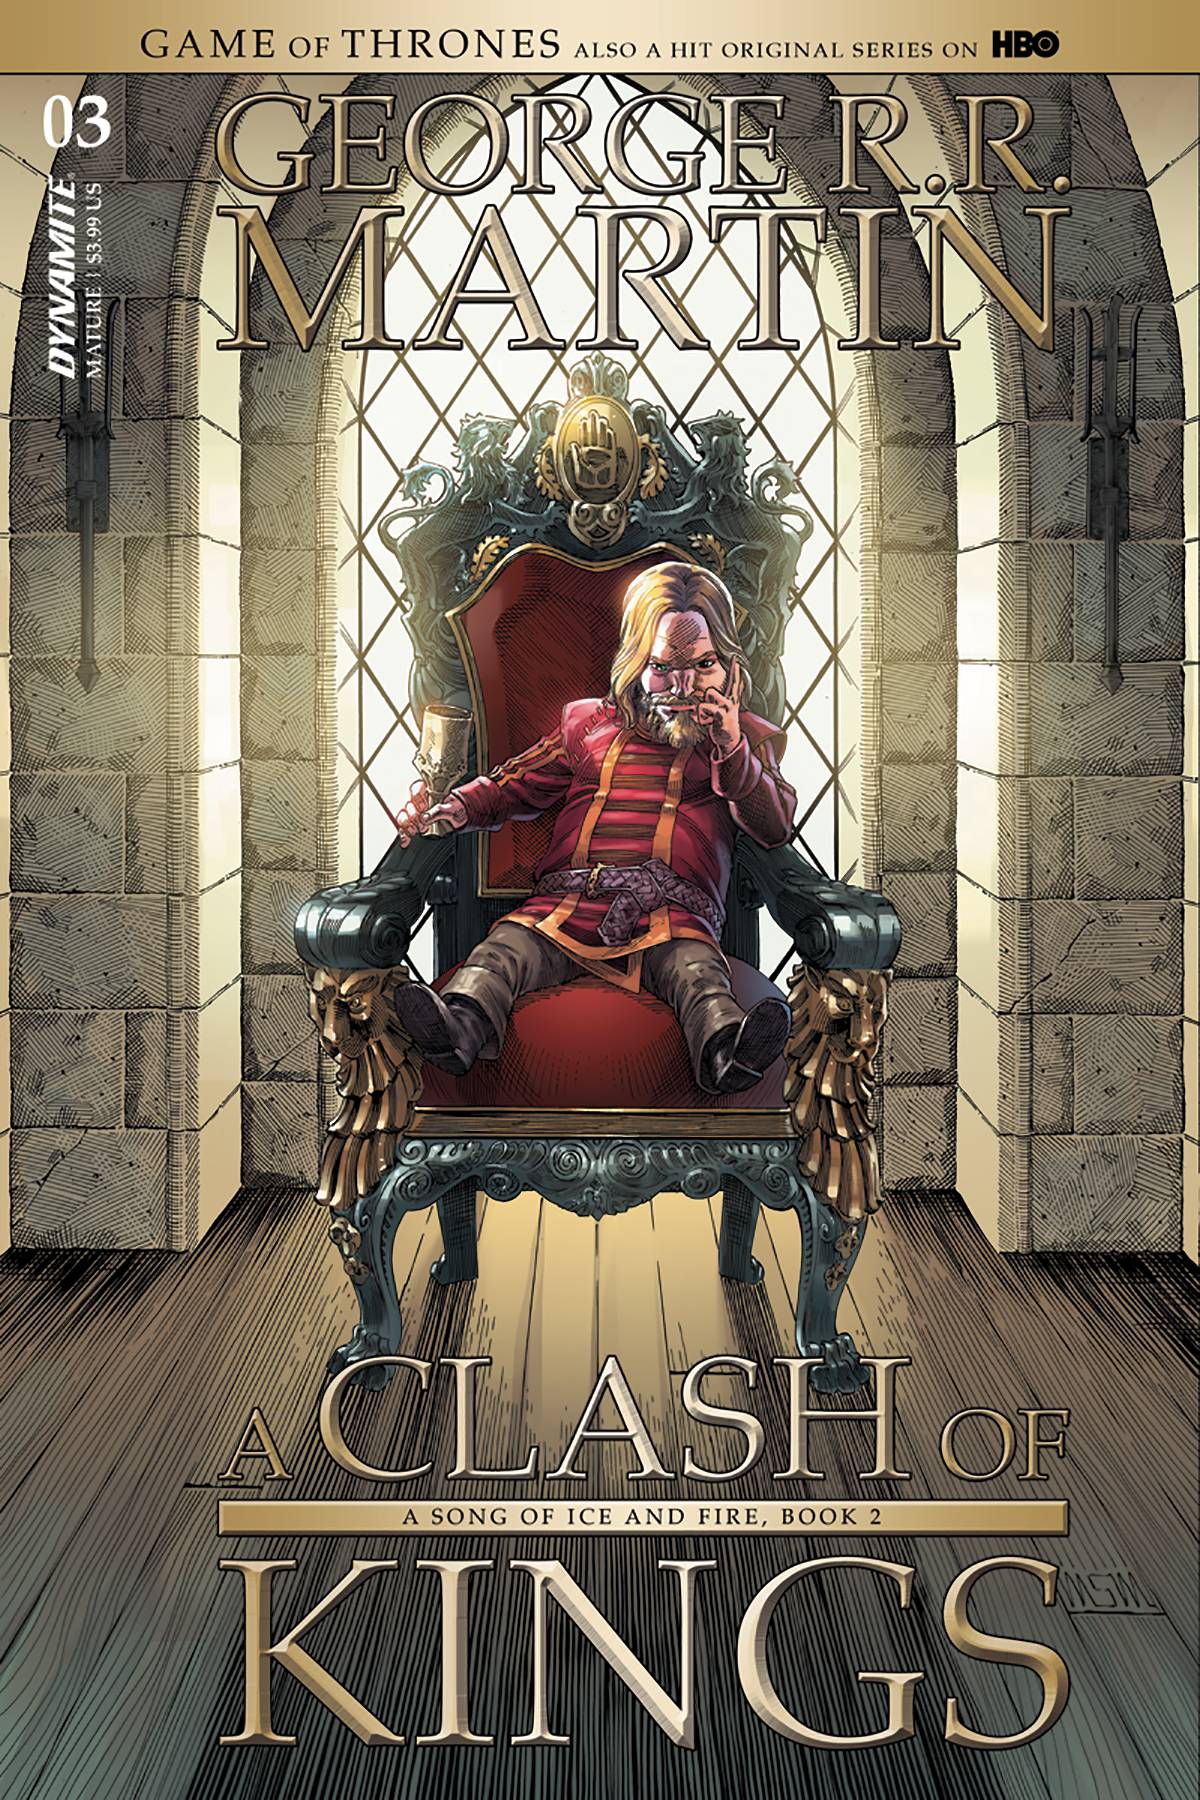 GAME OF THRONES: A CLASH OF KINGS#3